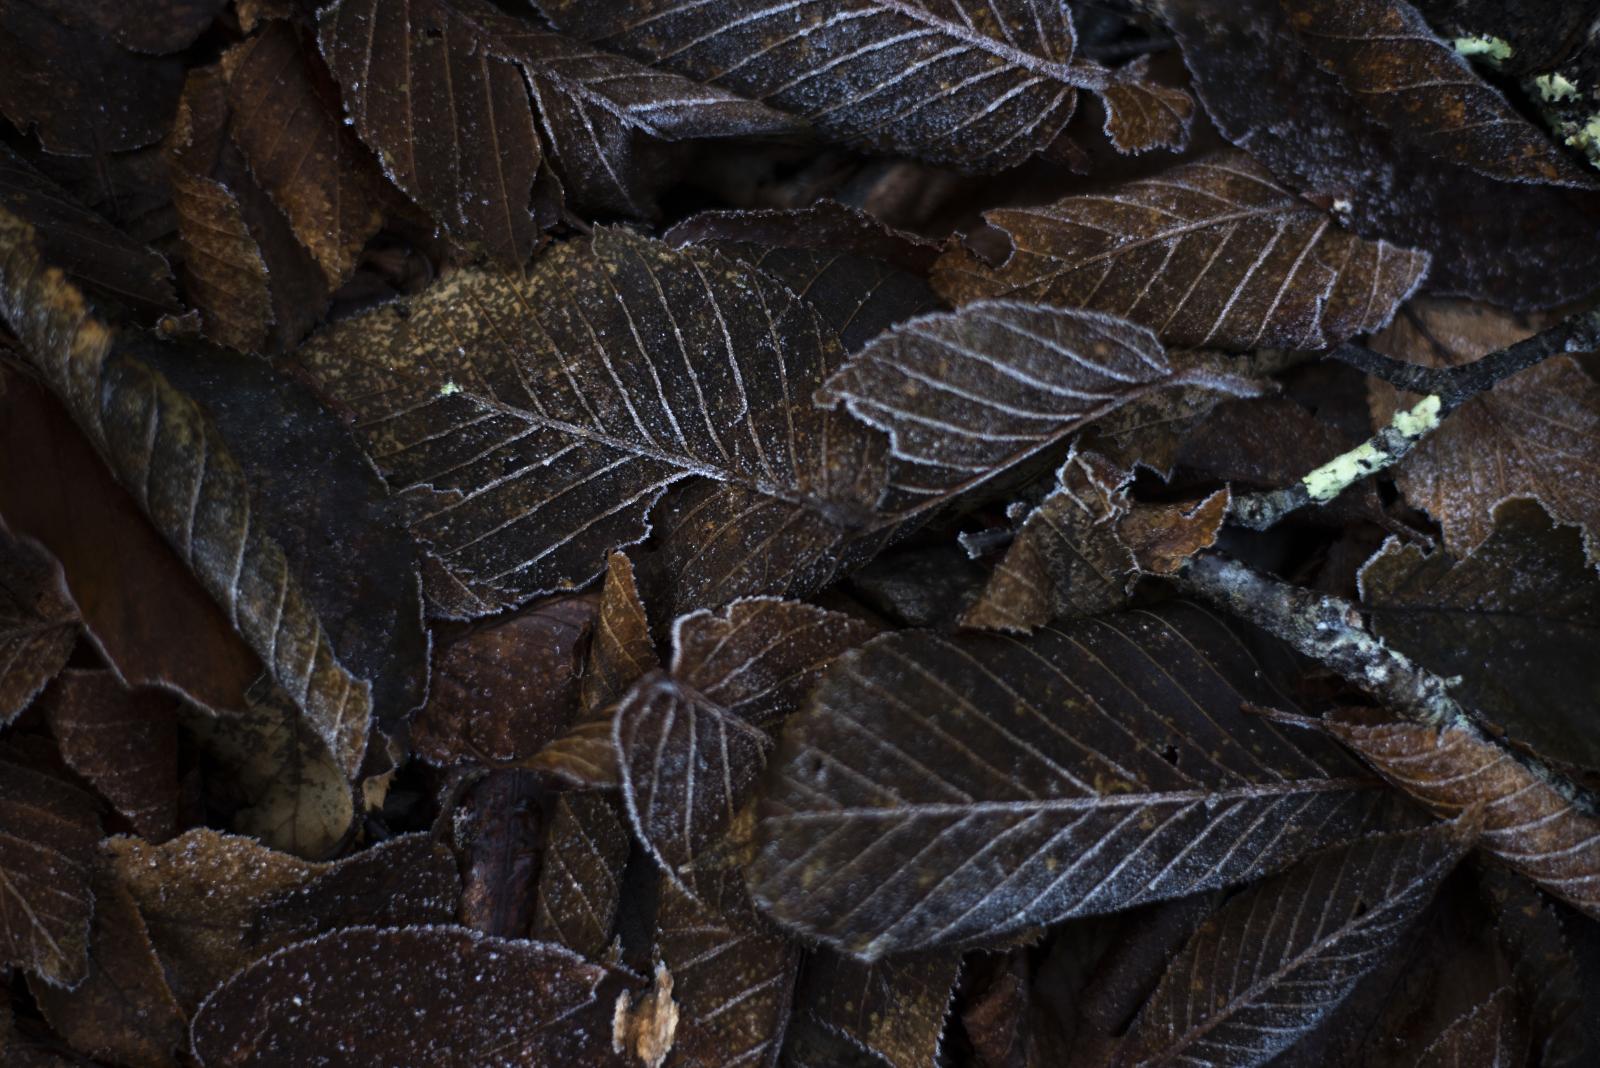 Frost highlights fallen leaves ... on Nov. 18, 2018 in Tennessee.